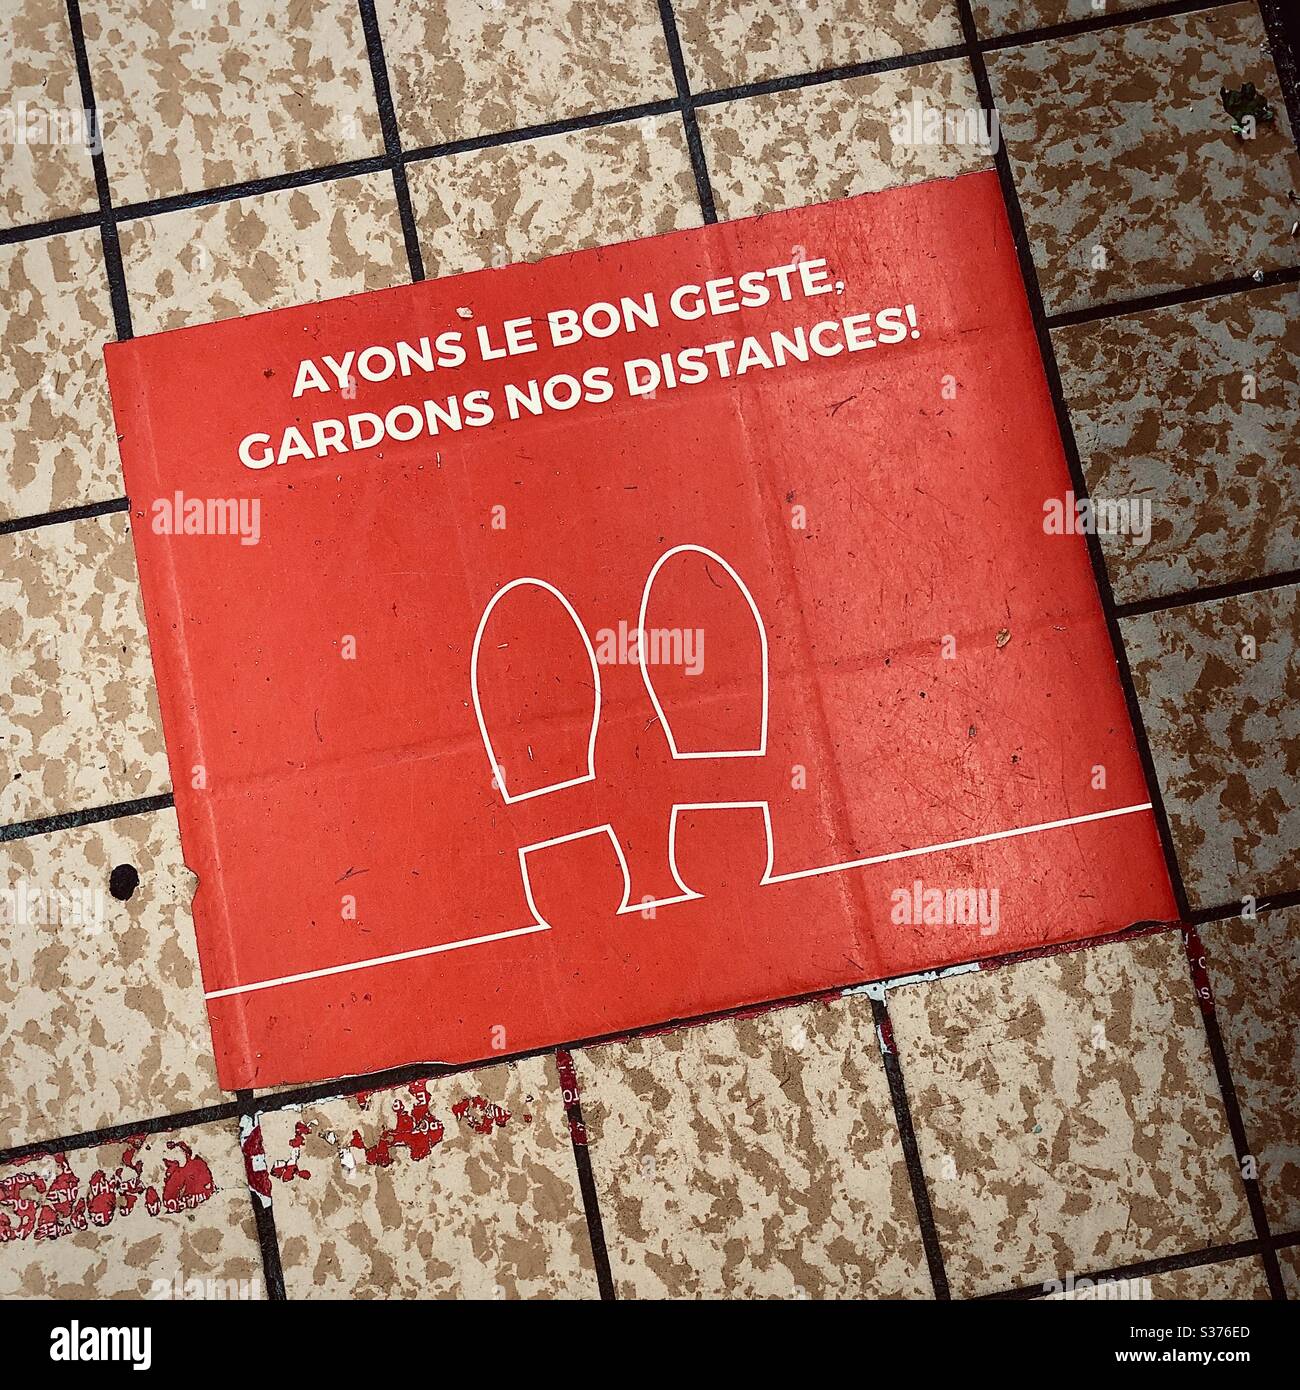 Notice on floor of LIDL store in France advising distance between shoppers during Covid-19 pandemic. Stock Photo